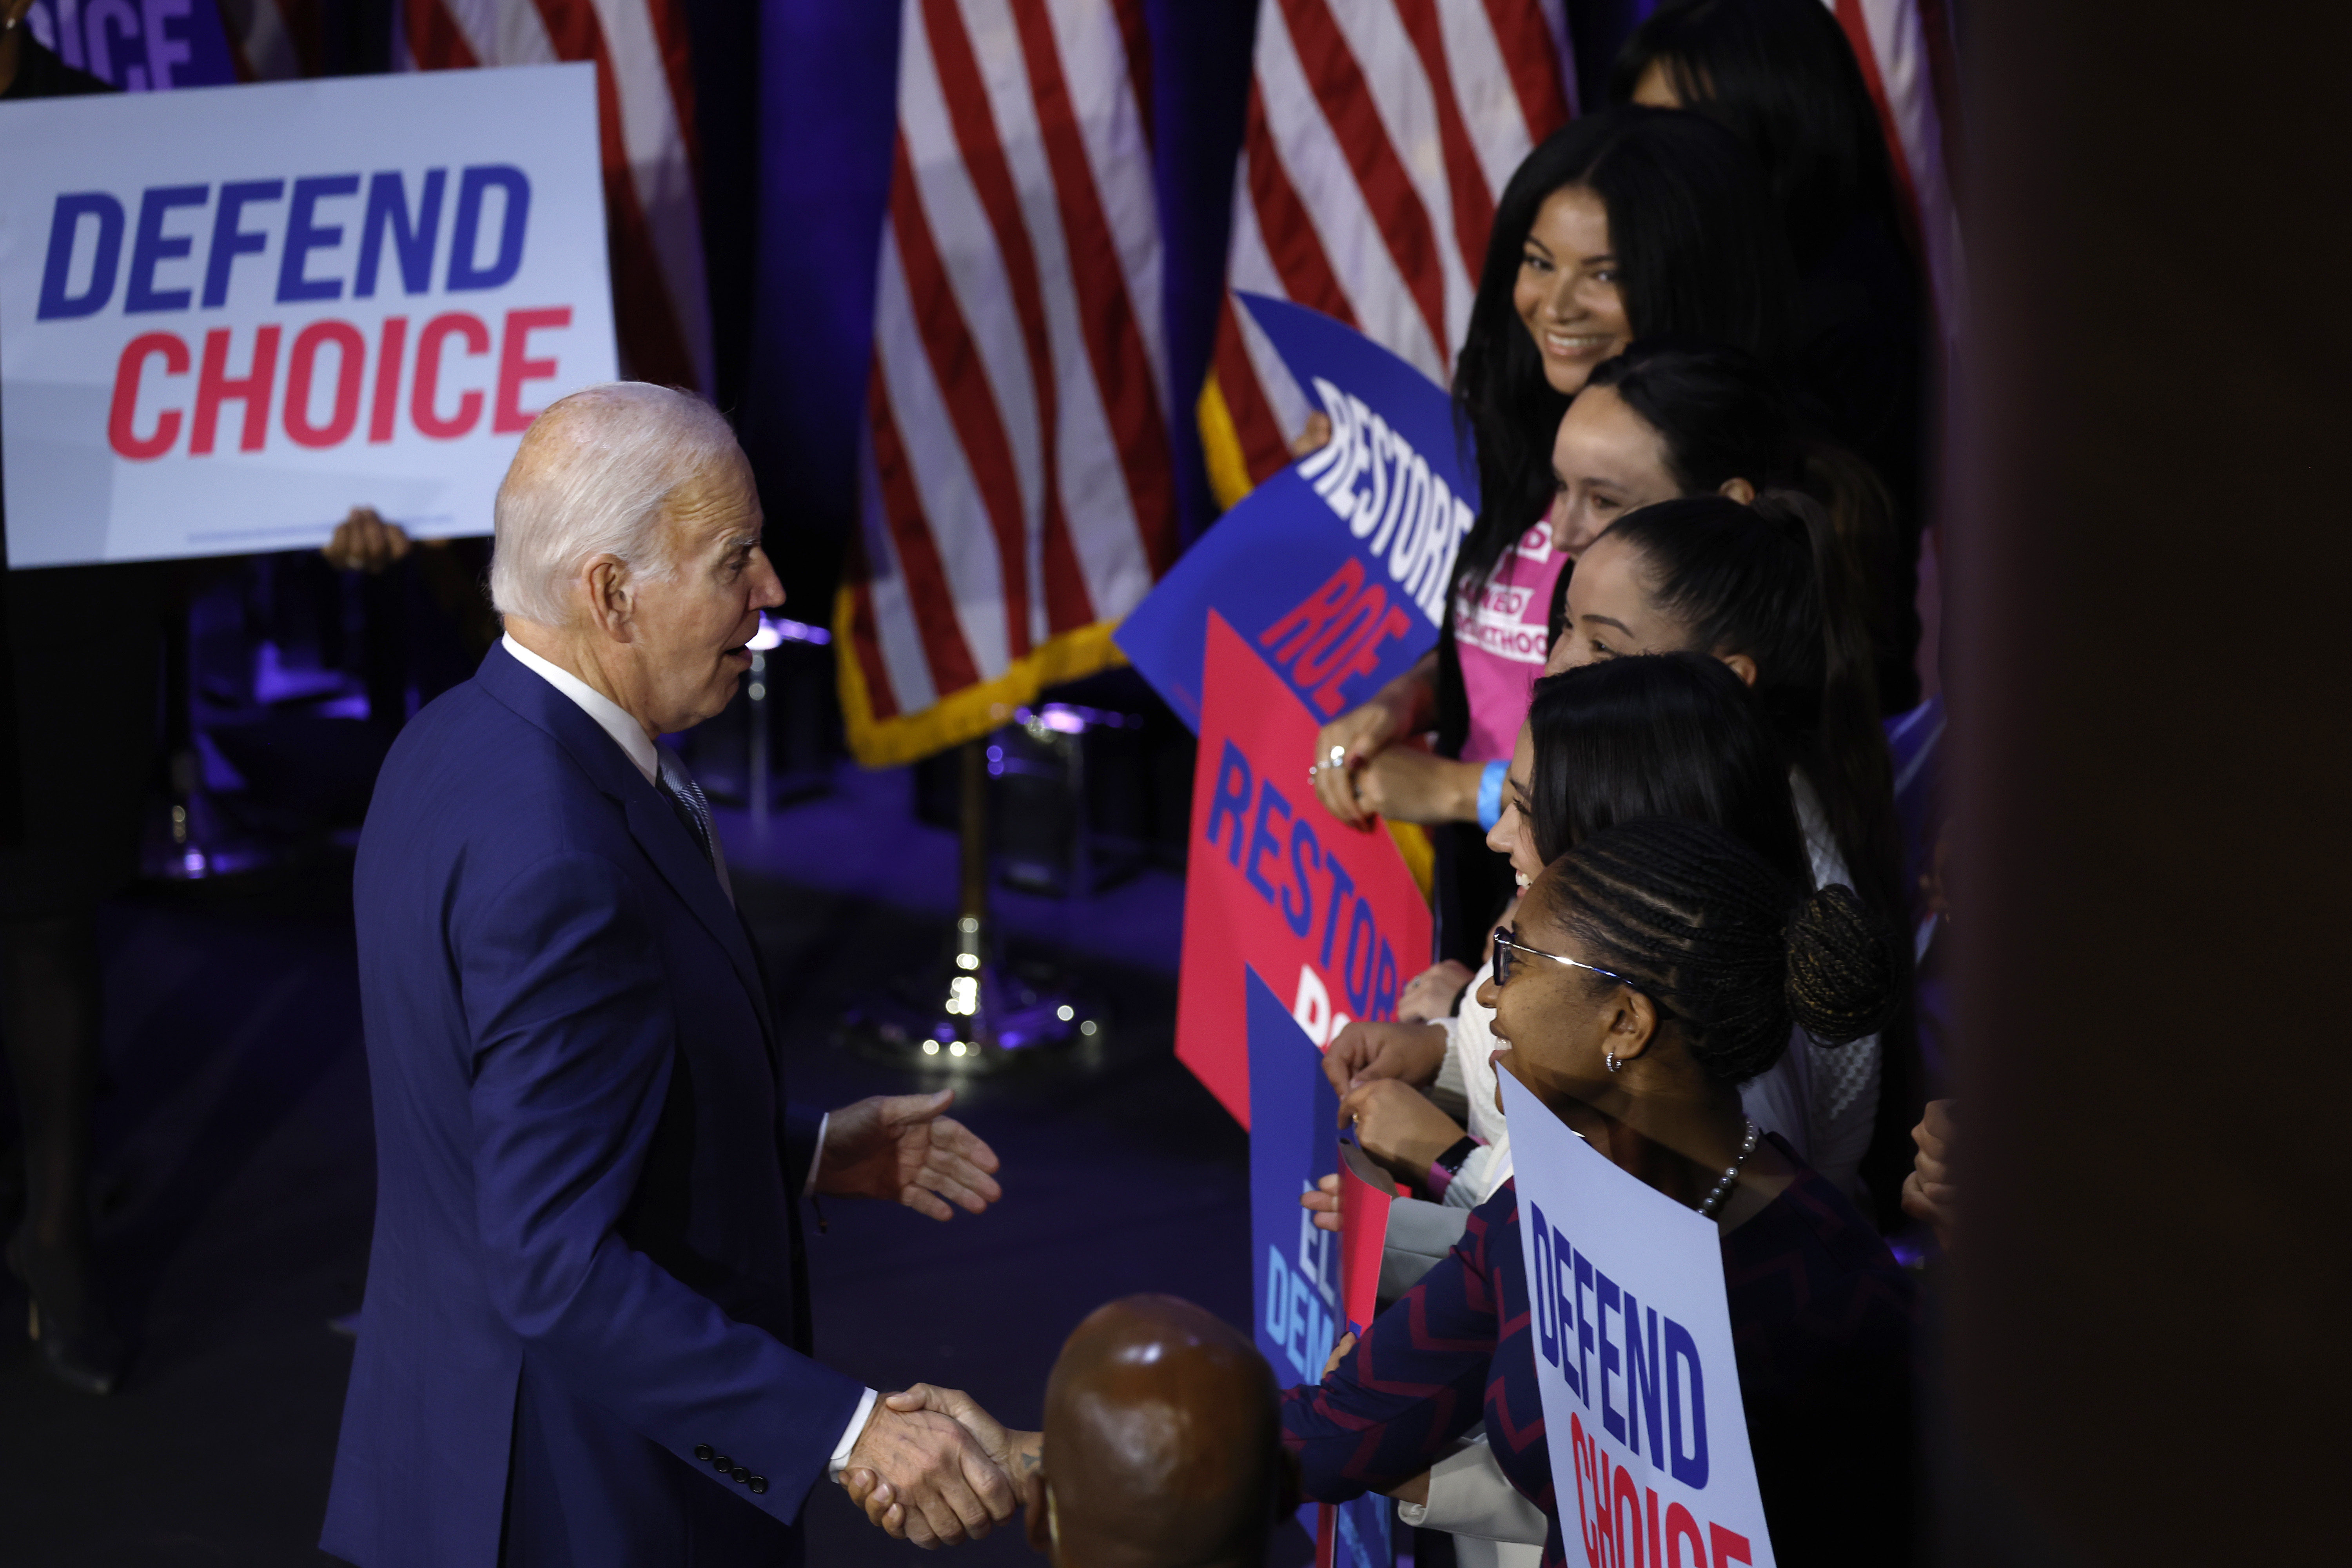 Joe Biden seen from the side shaking hands with a line of supporters holding signs that say Defend Choice.